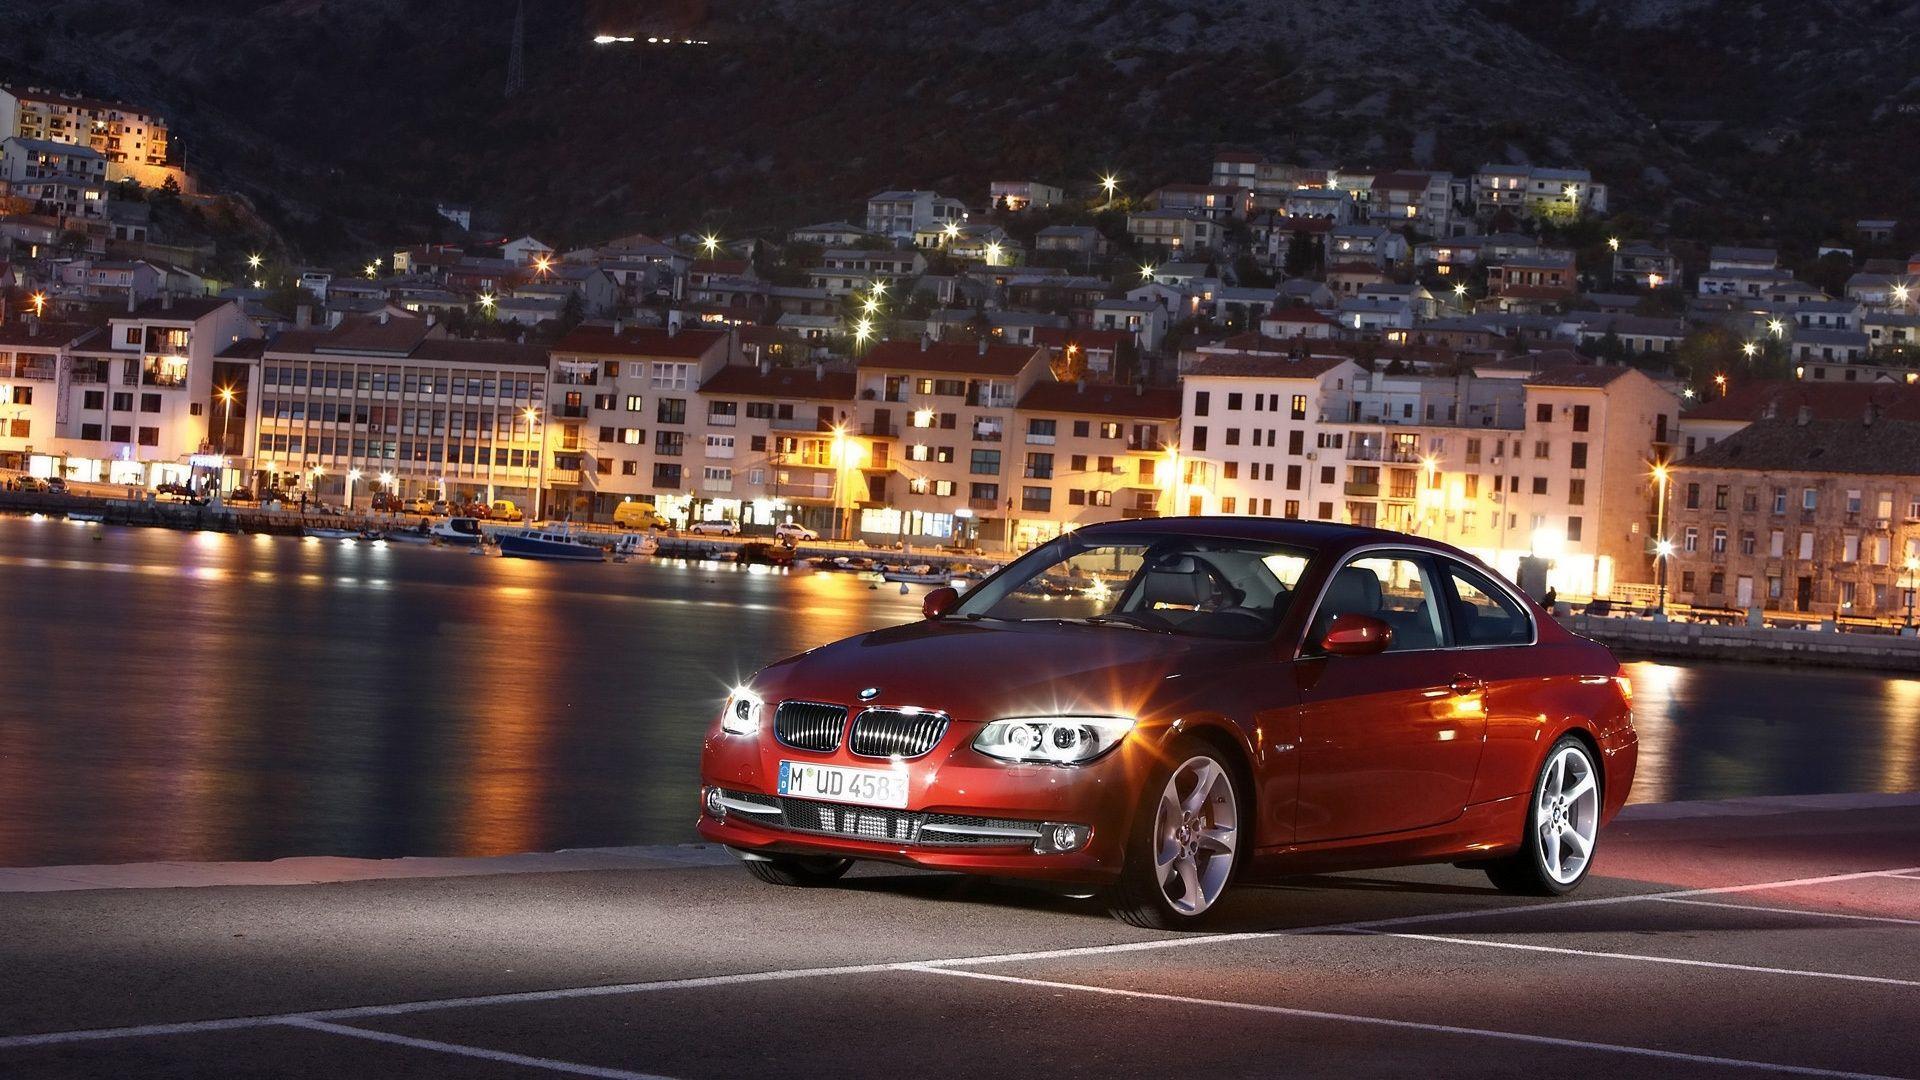 BMW 3 Series 2010 Red Sea Town Definition Wallpaper